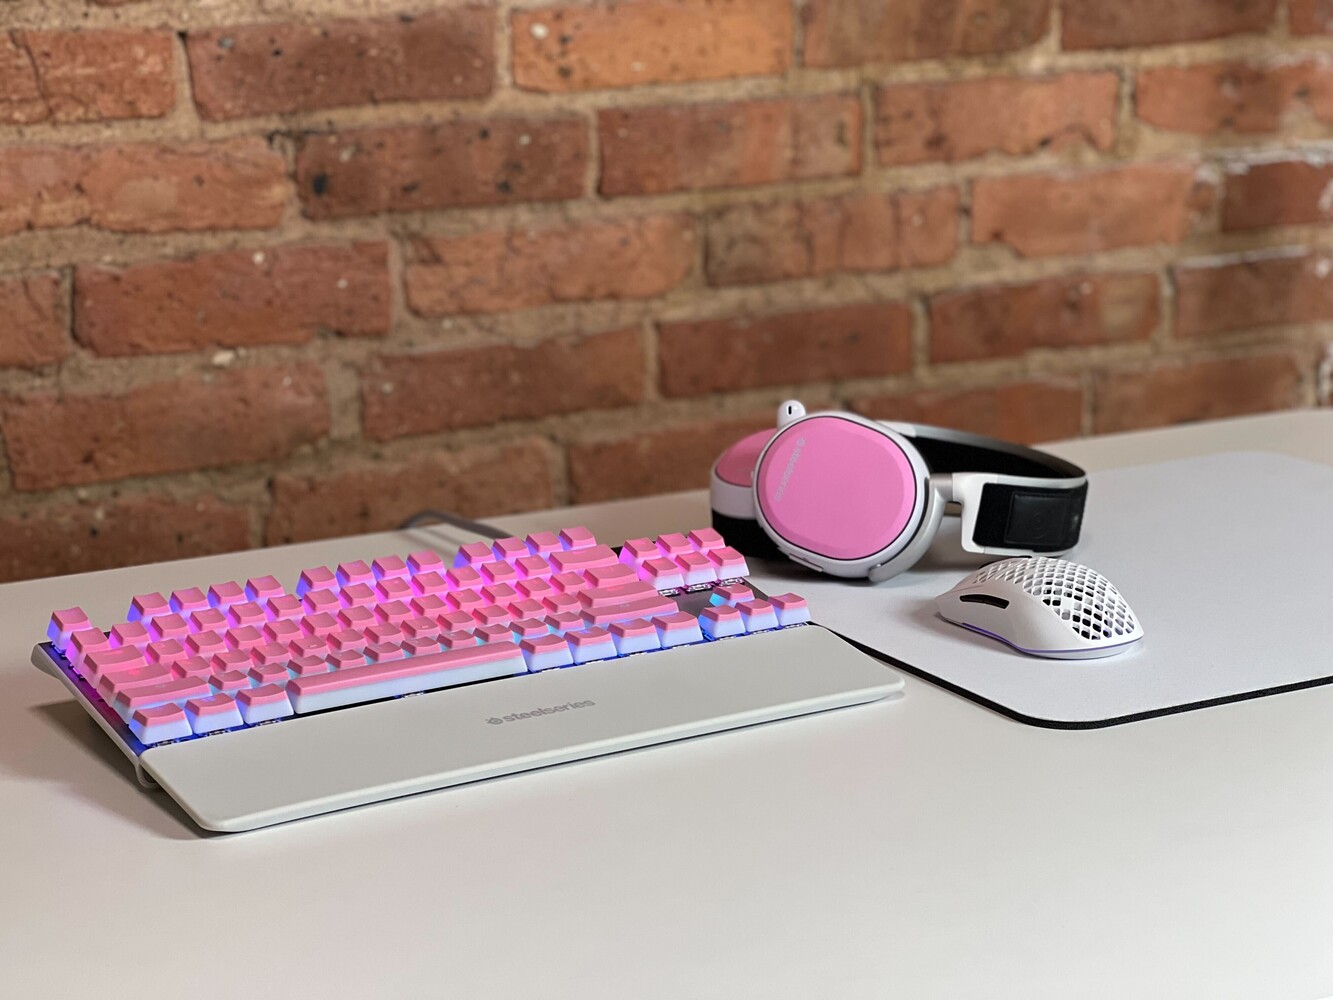 SteelSeries Apex Pro Mini Wireless looks better with Prismcaps